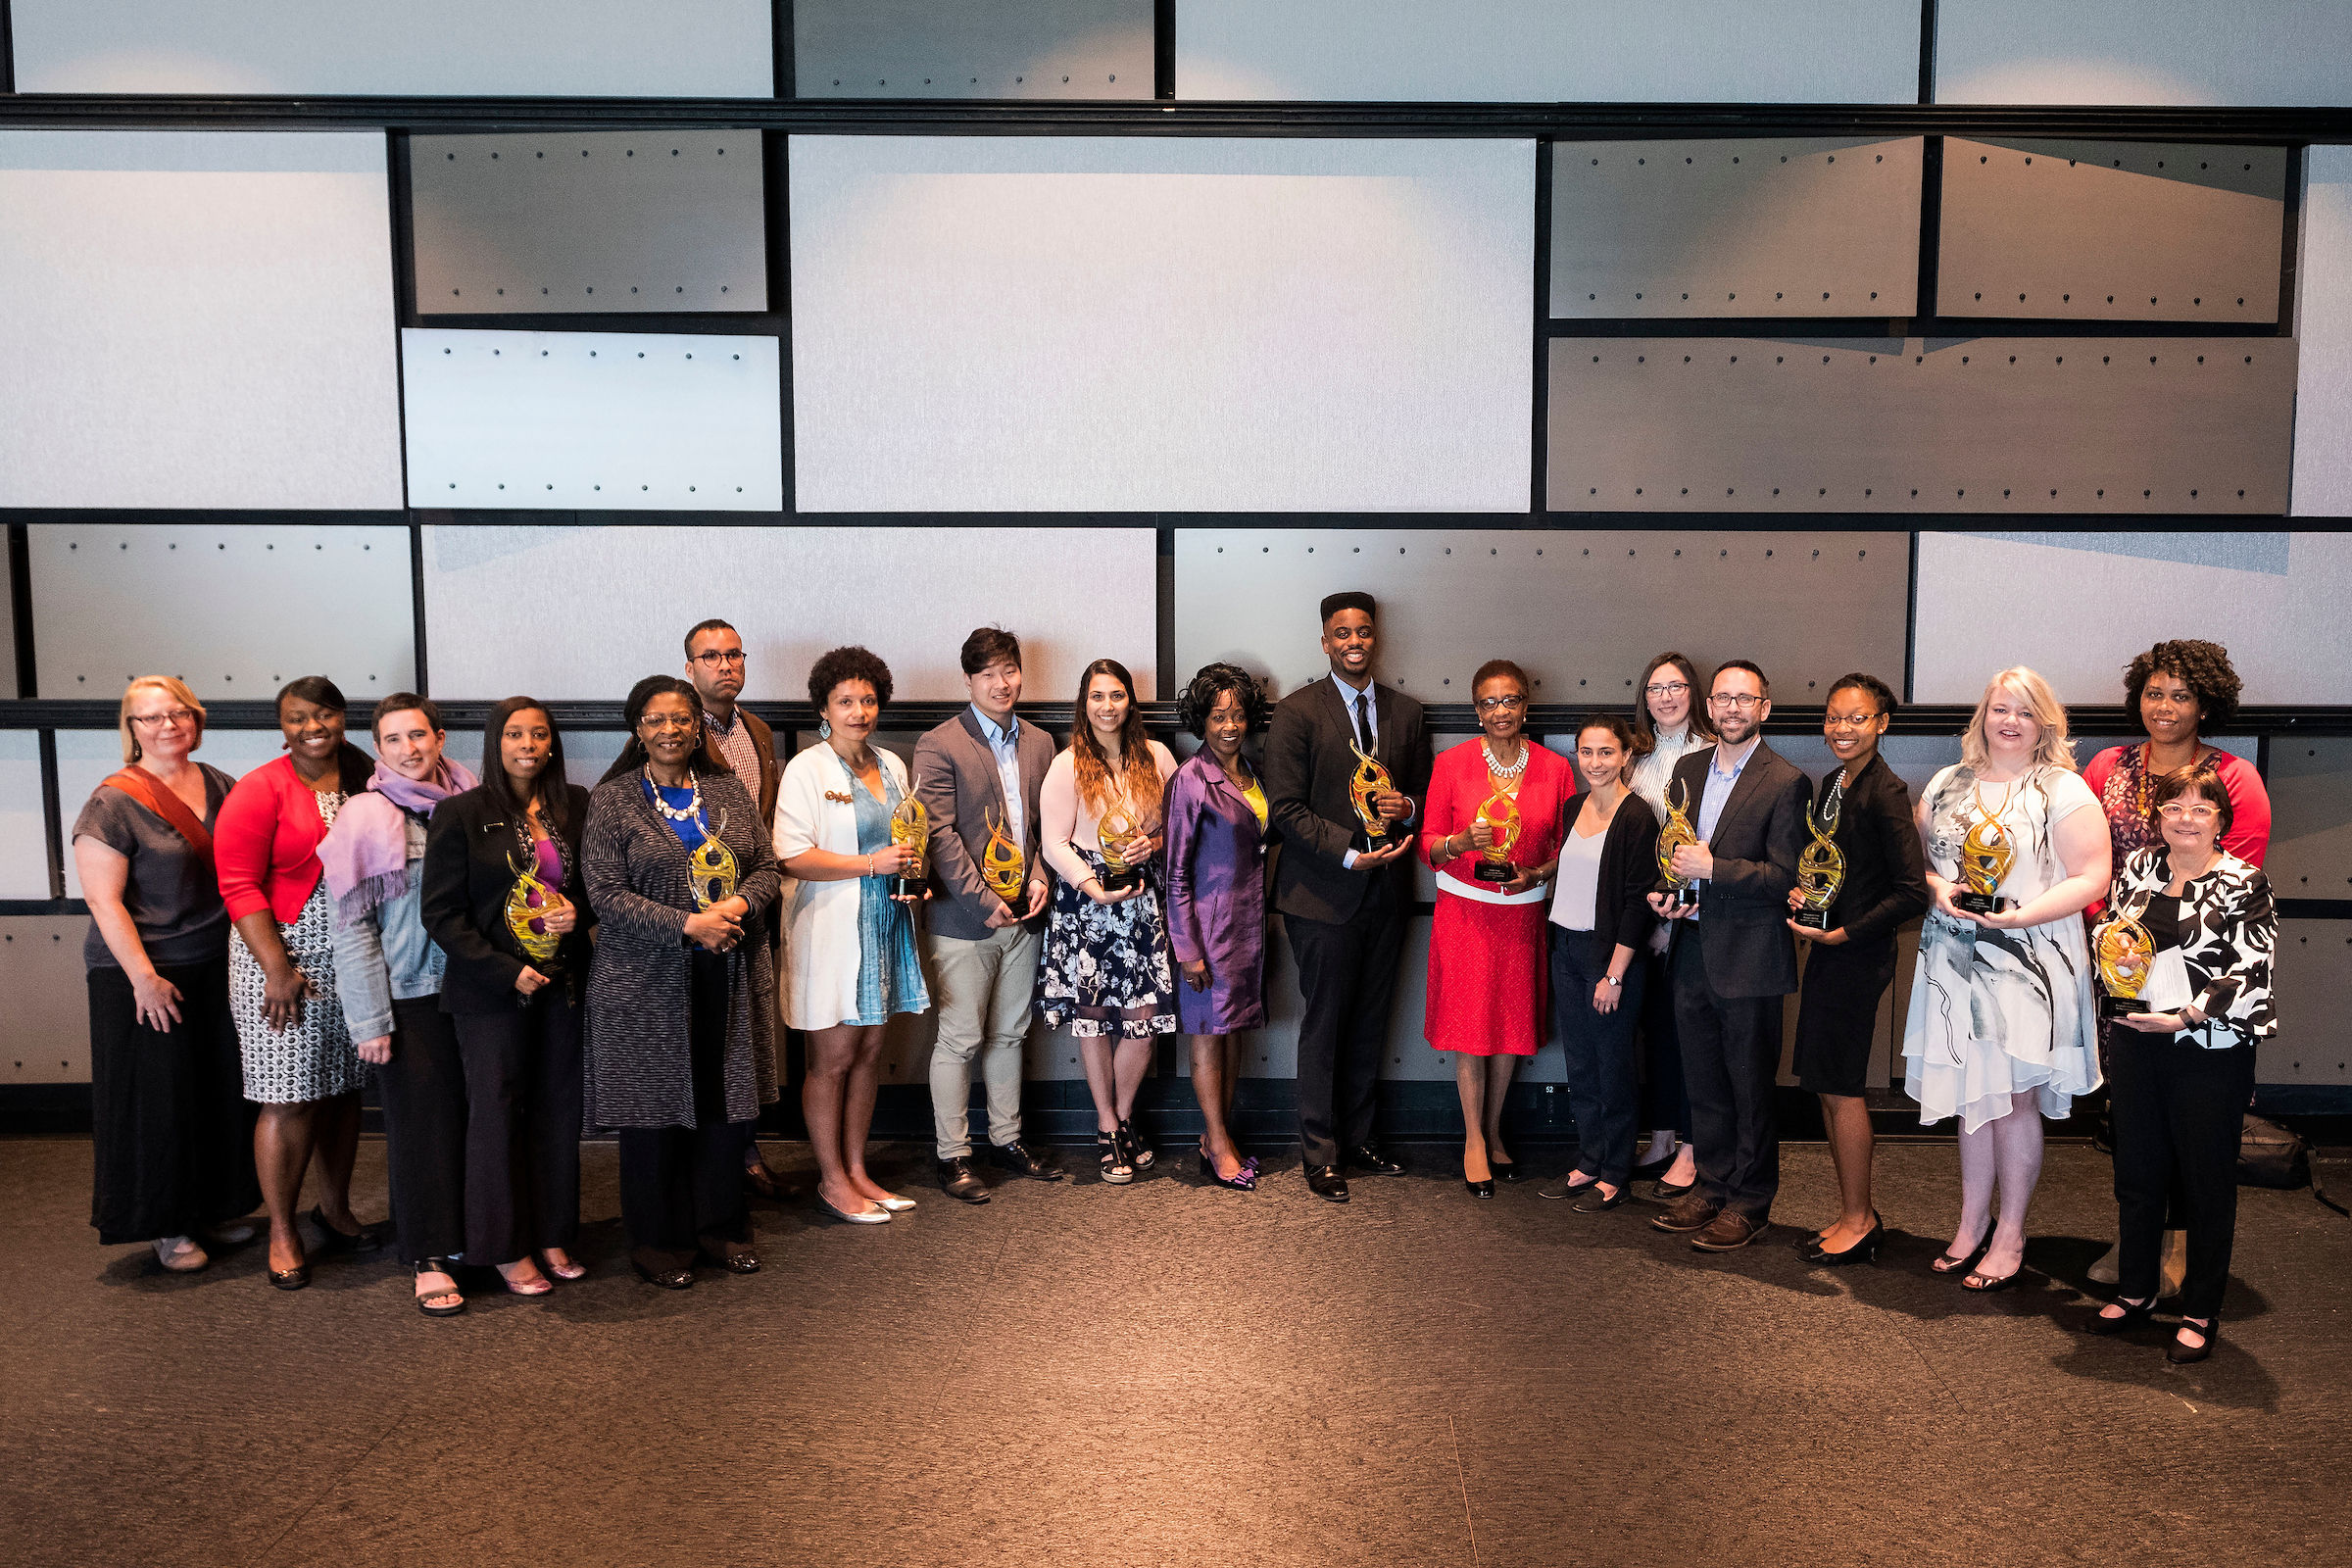 Large group of Diversity Award winners pose with their awards in front of a paneled wall.